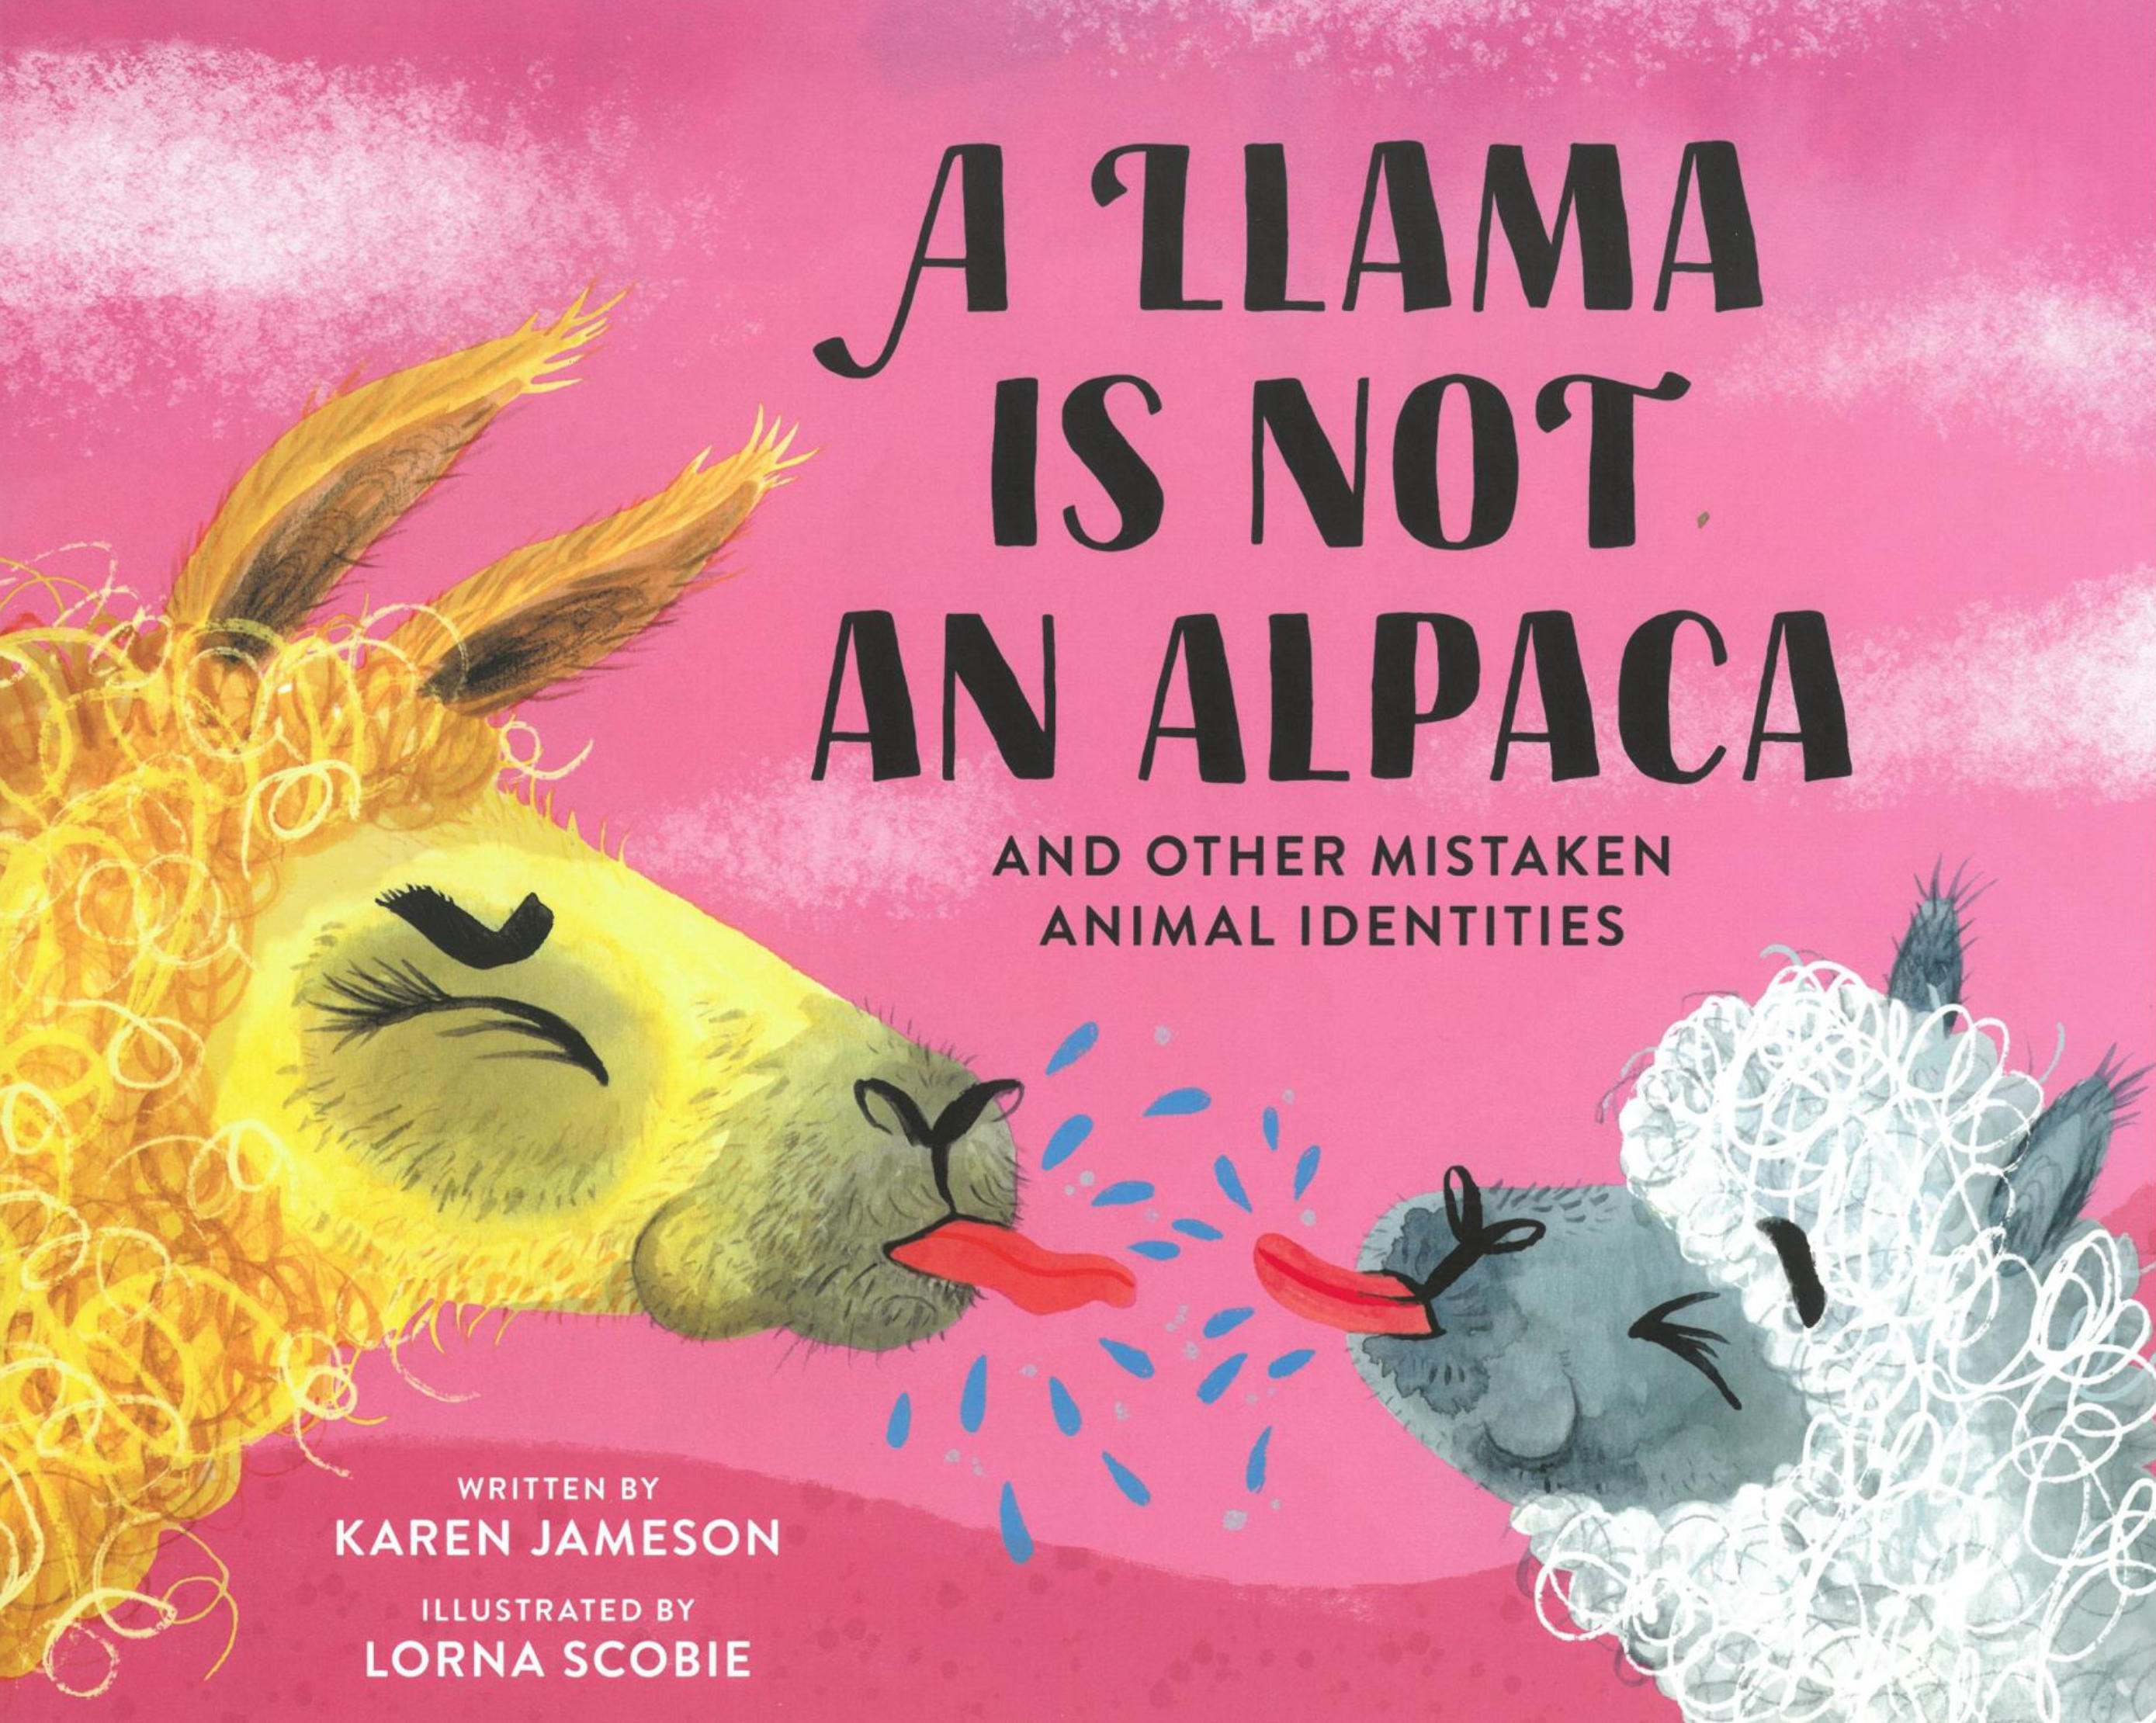 Pink Book Cover with a alpaca and a white llama, both sticking out their tounges.  , A Lllama is not an Alpaca and other mistaken Animal Identities. Written By Karen Jameson and Illustrated by Lorna Scobie.